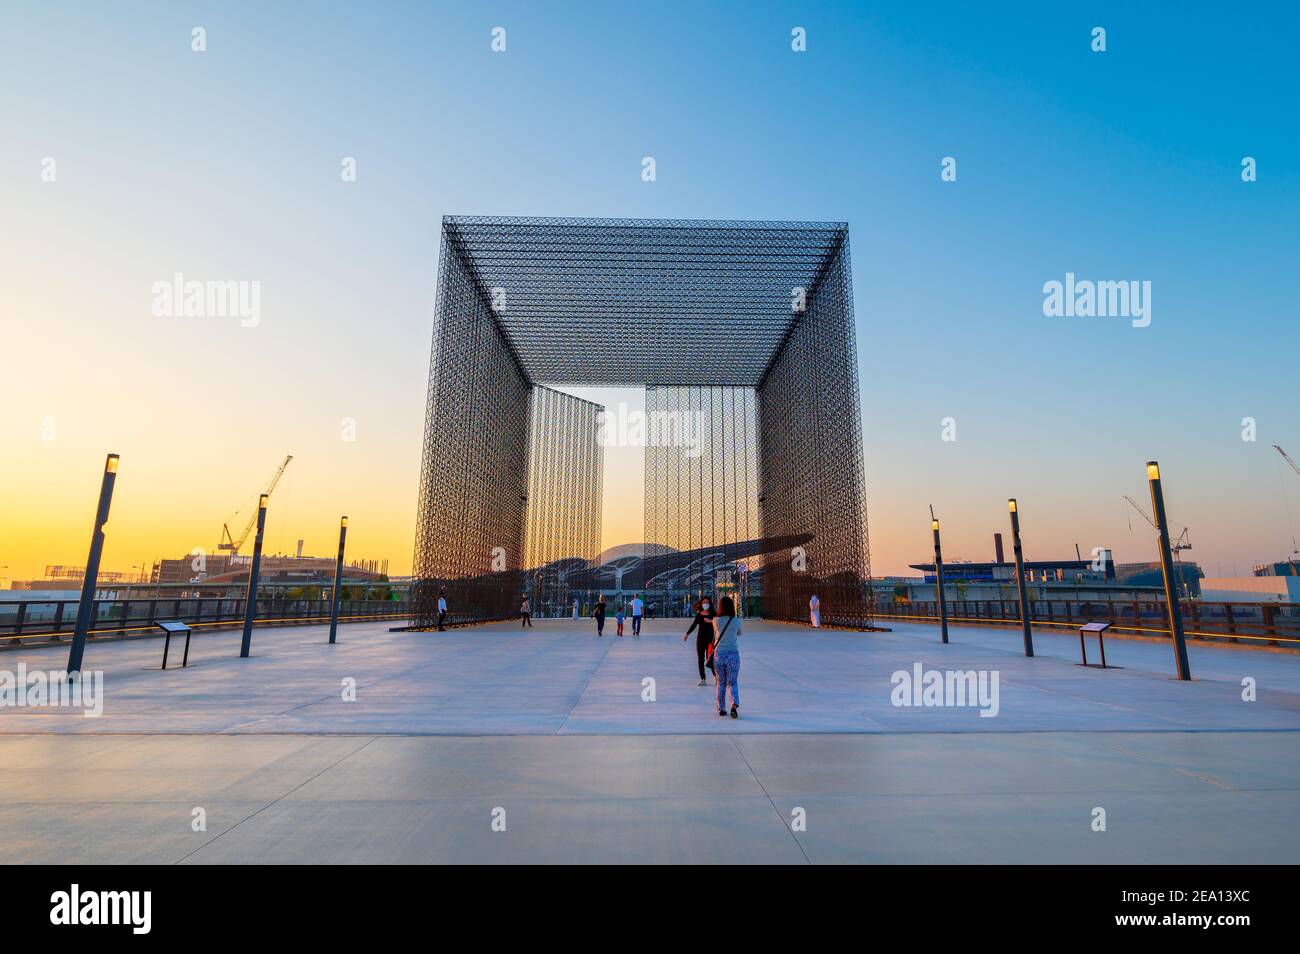 Dubai, United Arab Emirates - February 4, 2020: Entrance of Terra Sustainability Pavilion at the EXPO 2020 at sunset built for EXPO 2020 scheduled to Stock Photo